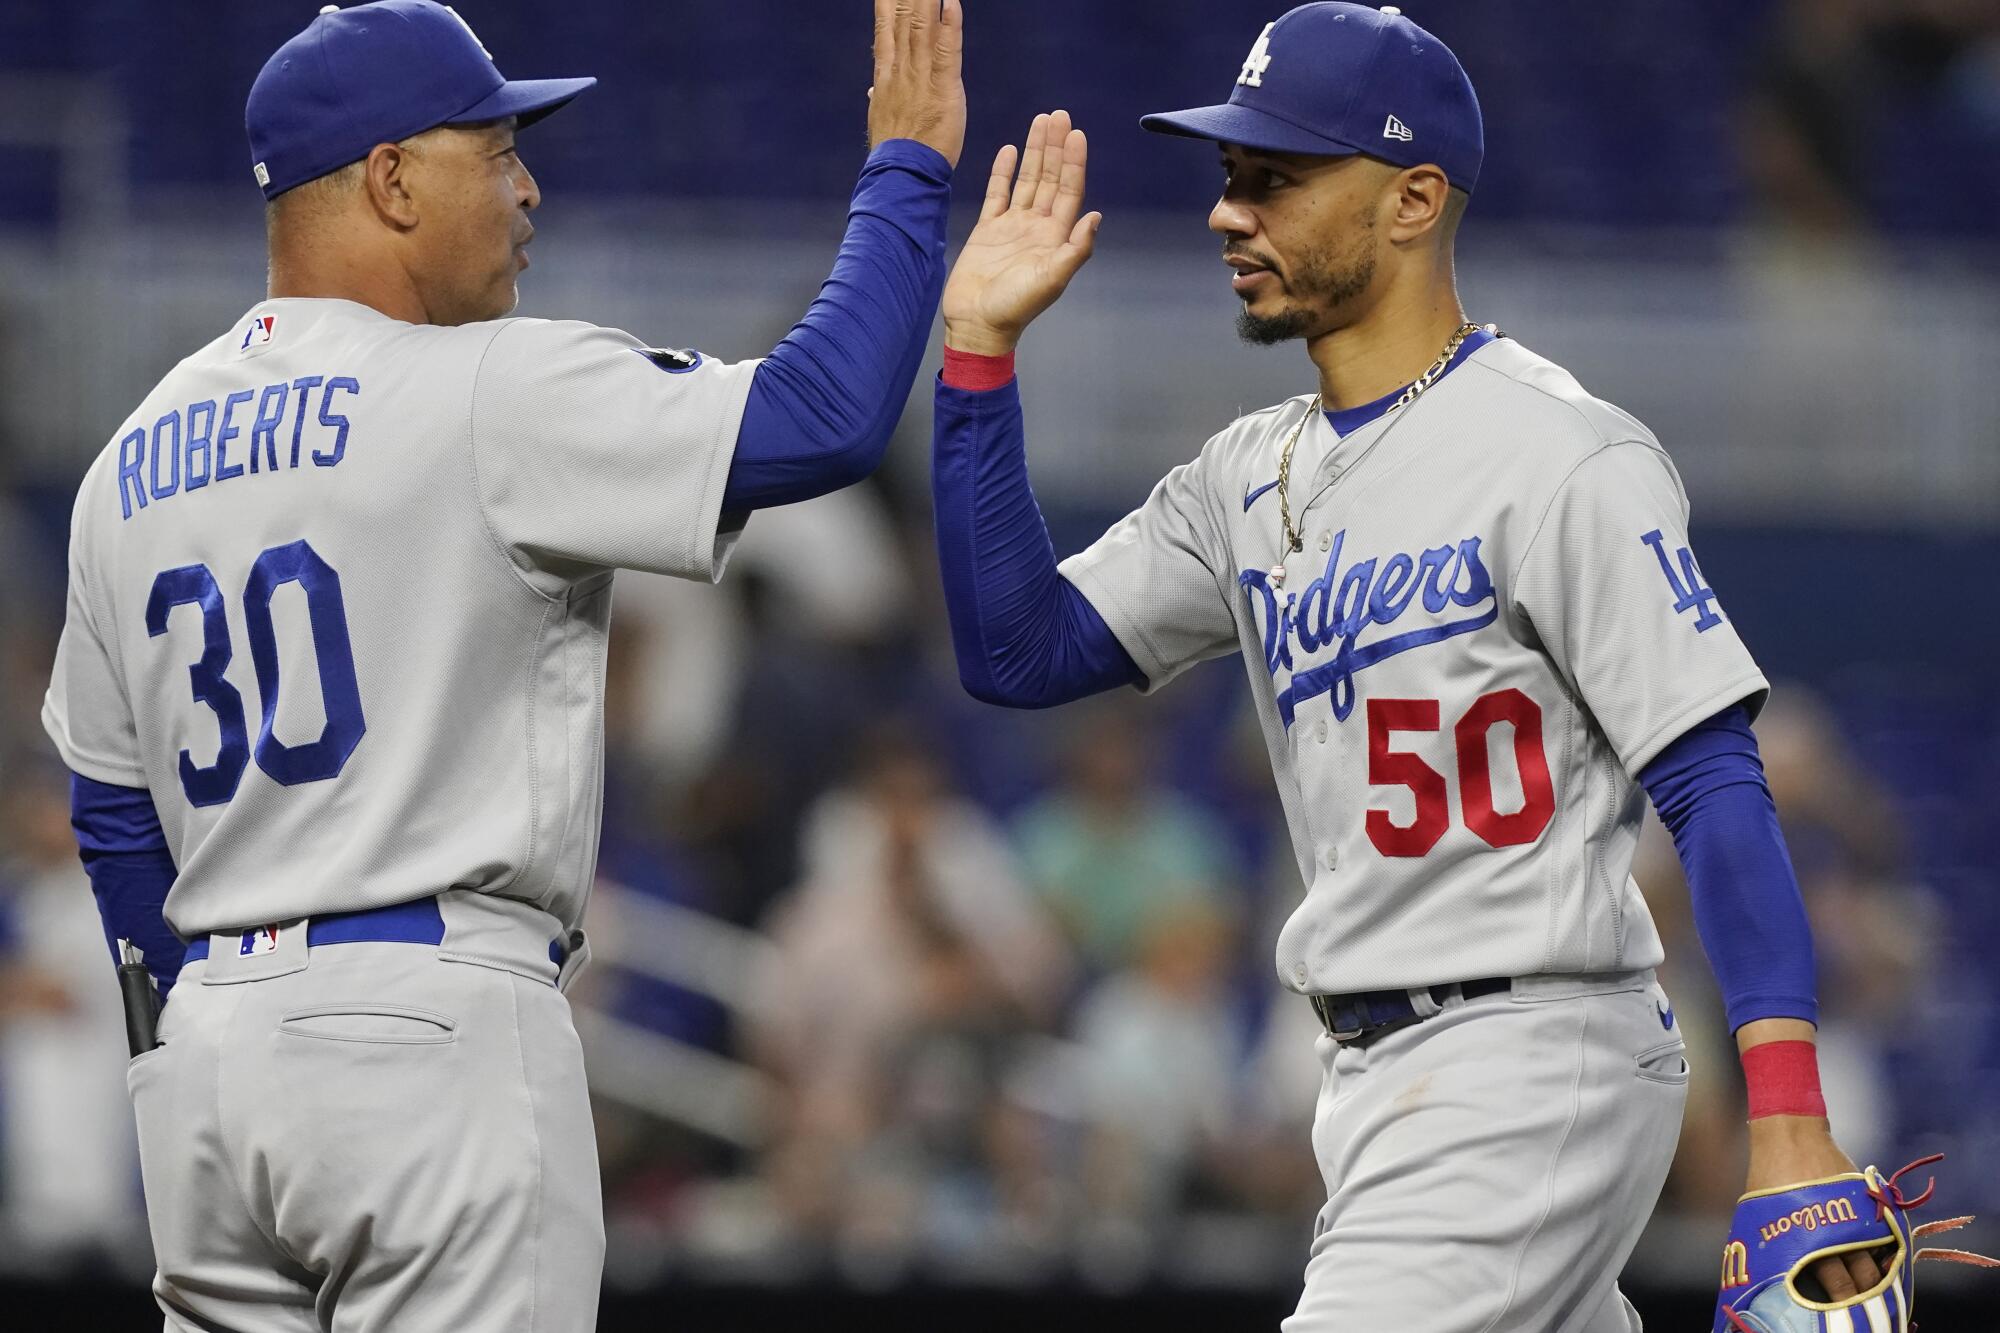 Dodgers manager Dave Roberts, left, congratulates right fielder Mookie Betts after the Dodgers' 8-1 win.